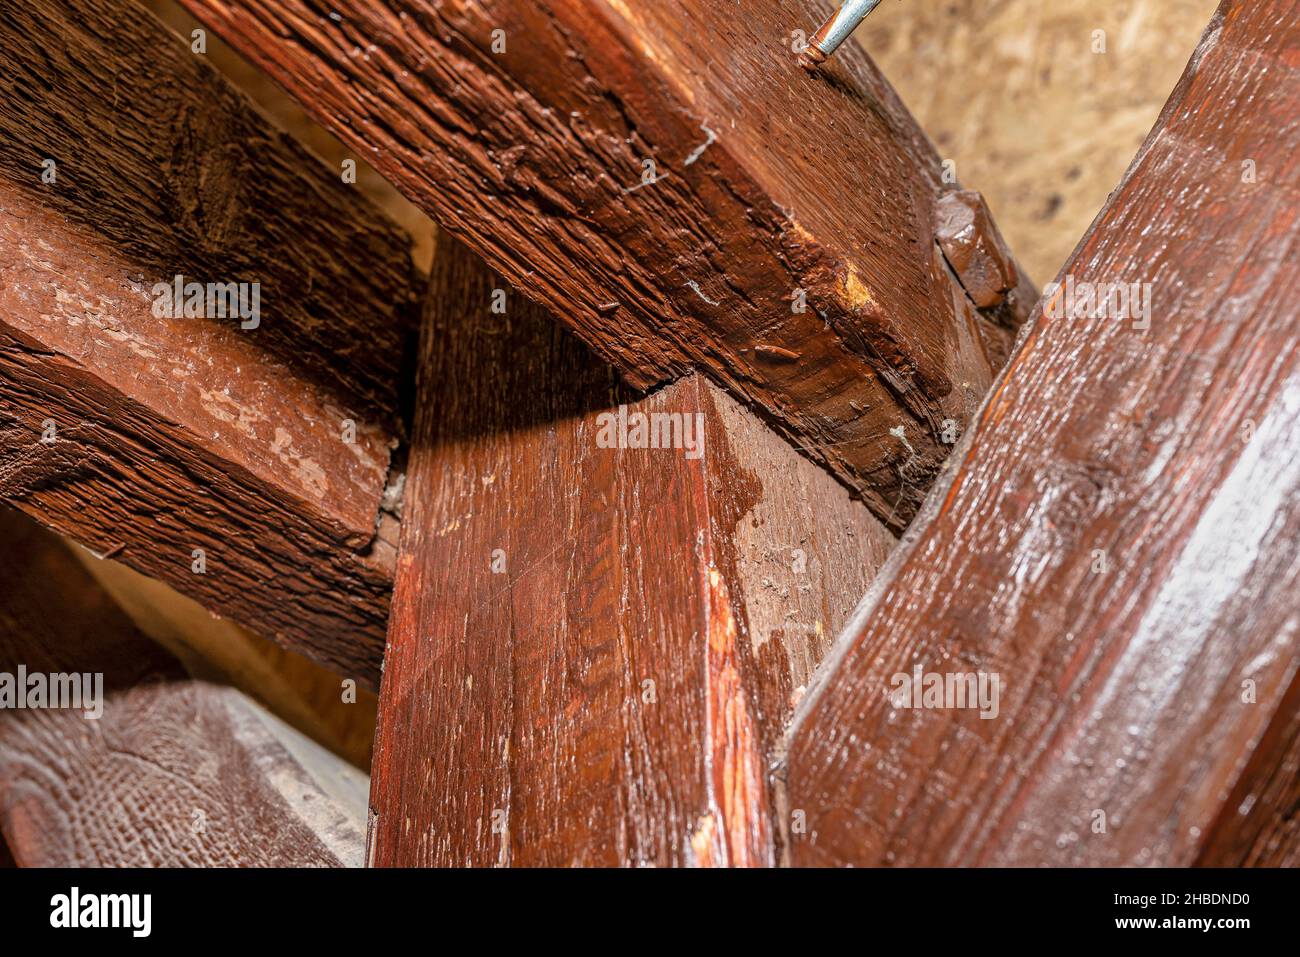 Roof truss visible in the attic house, painted brown with visible cracks in the wood, walls covered with OSB boards. Stock Photo